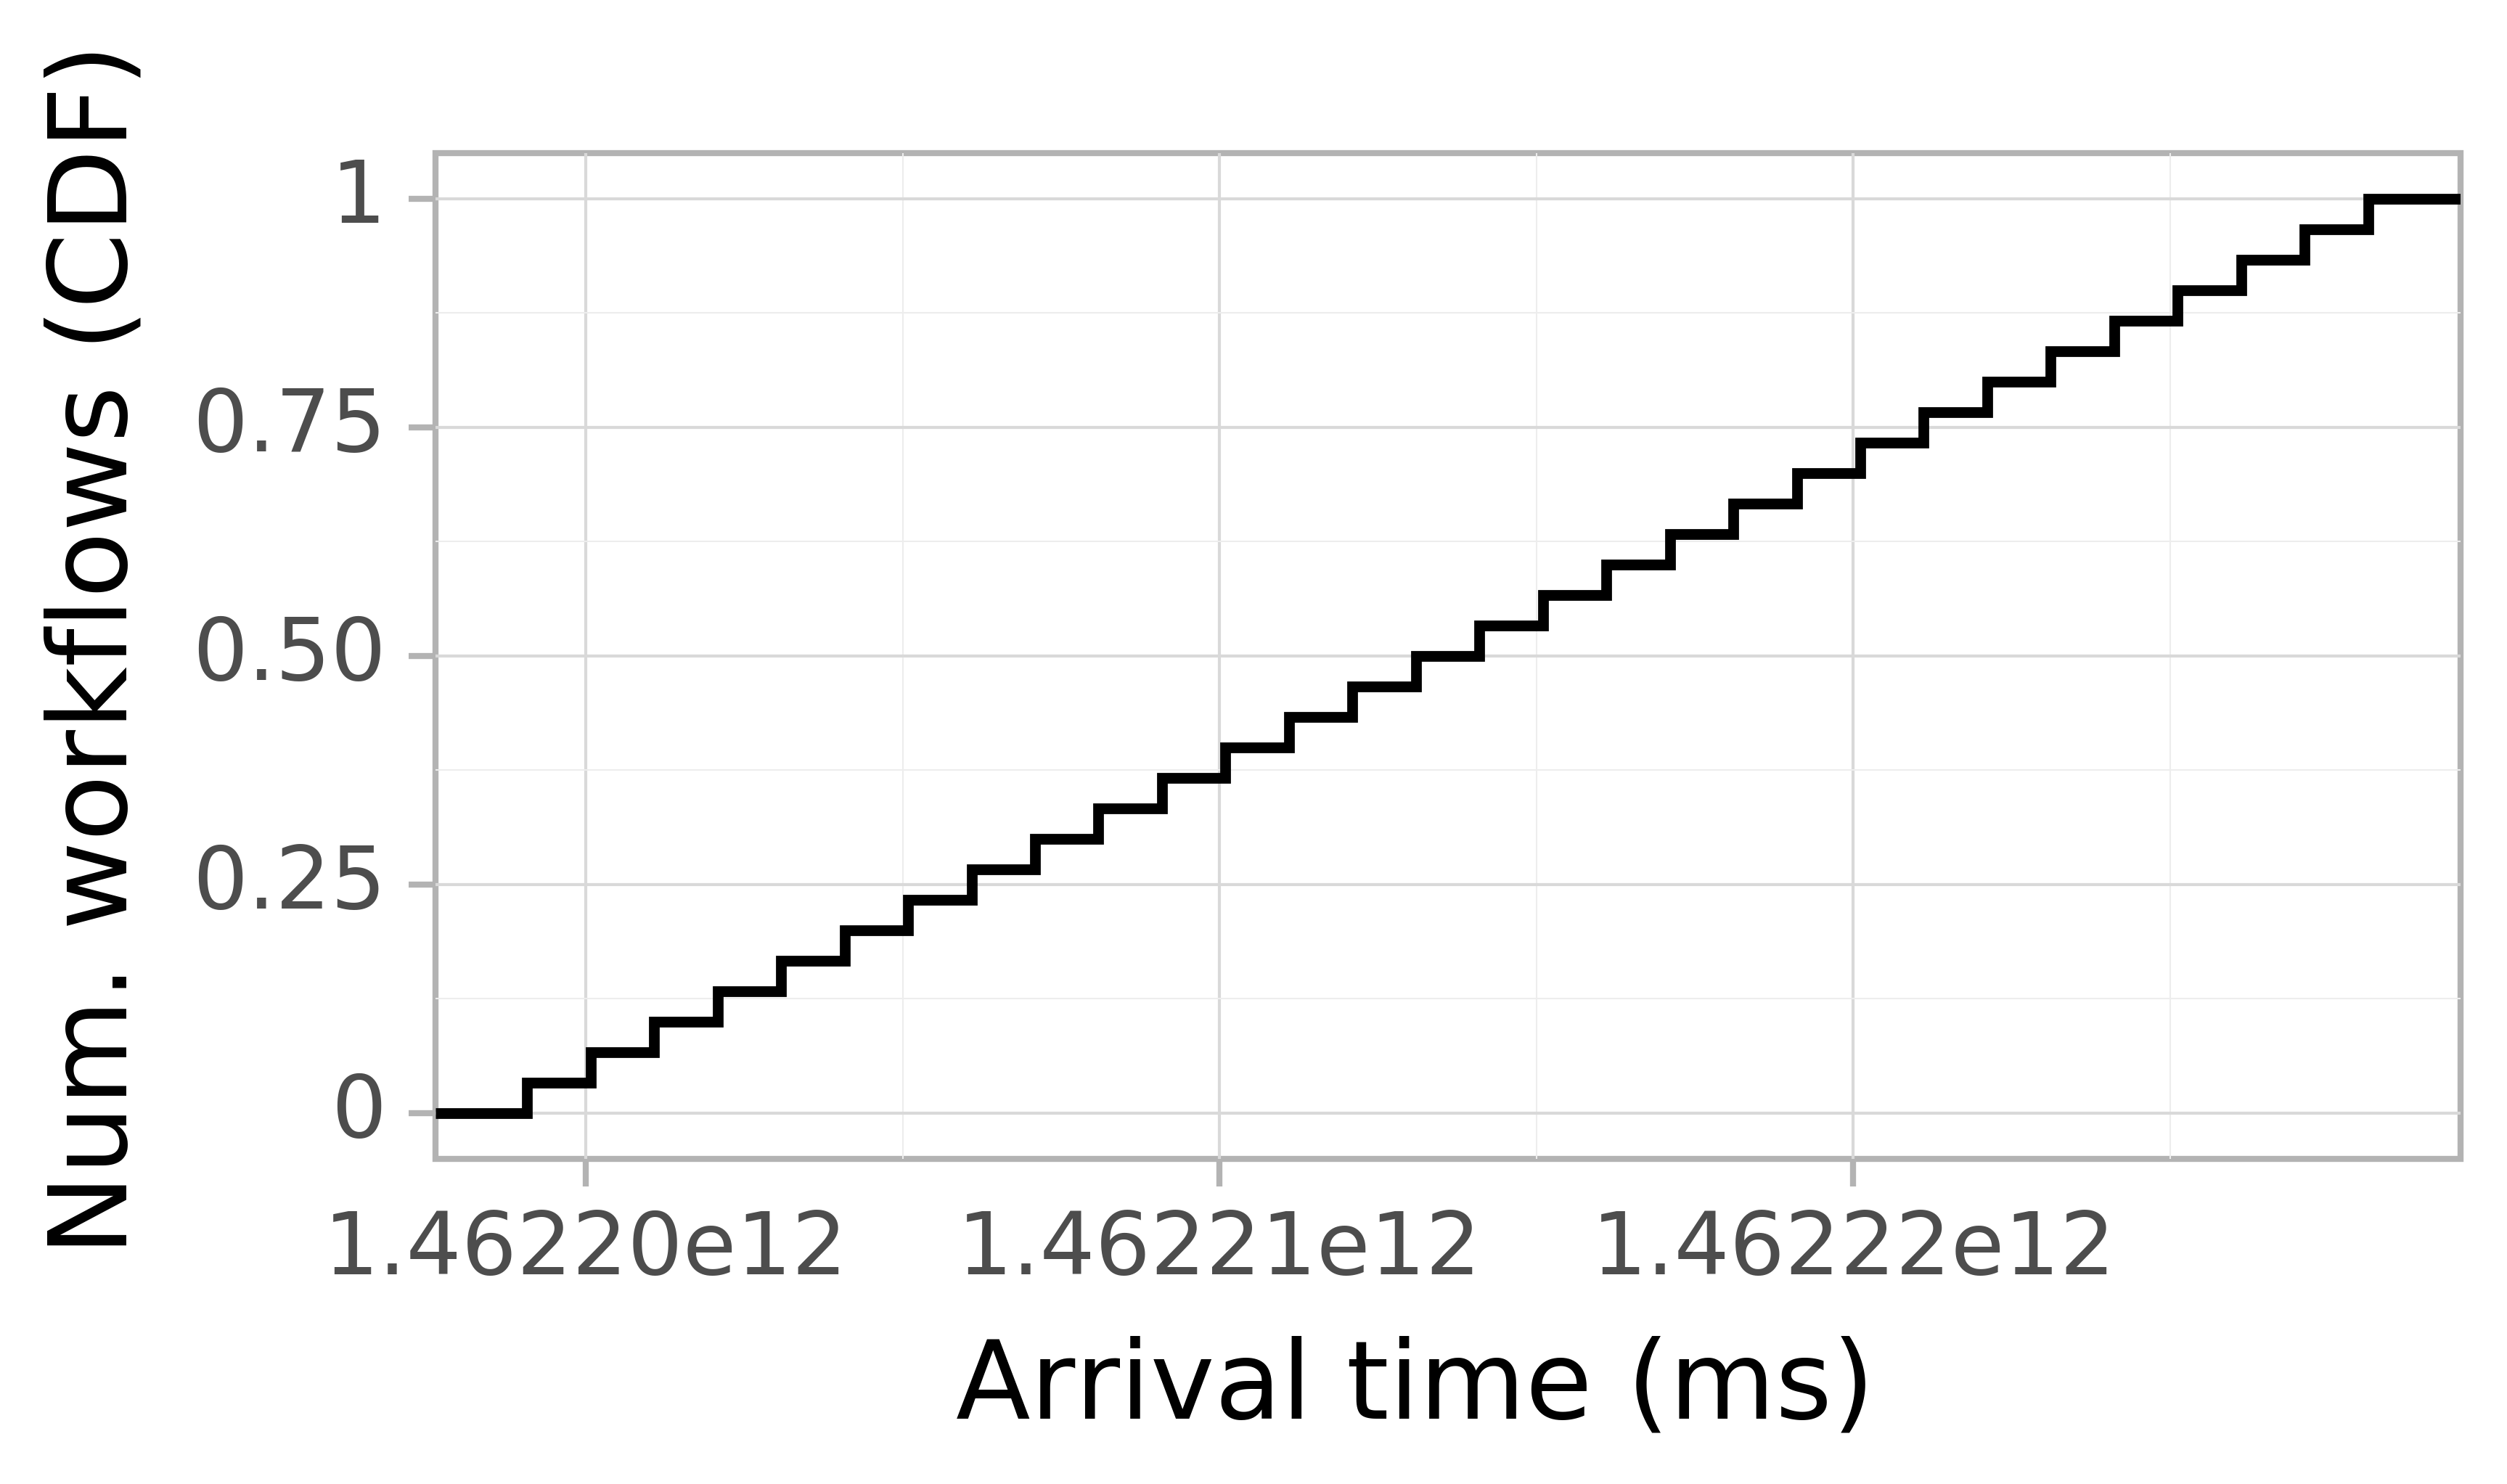 Job arrival CDF graph for the askalon-new_ee48 trace.